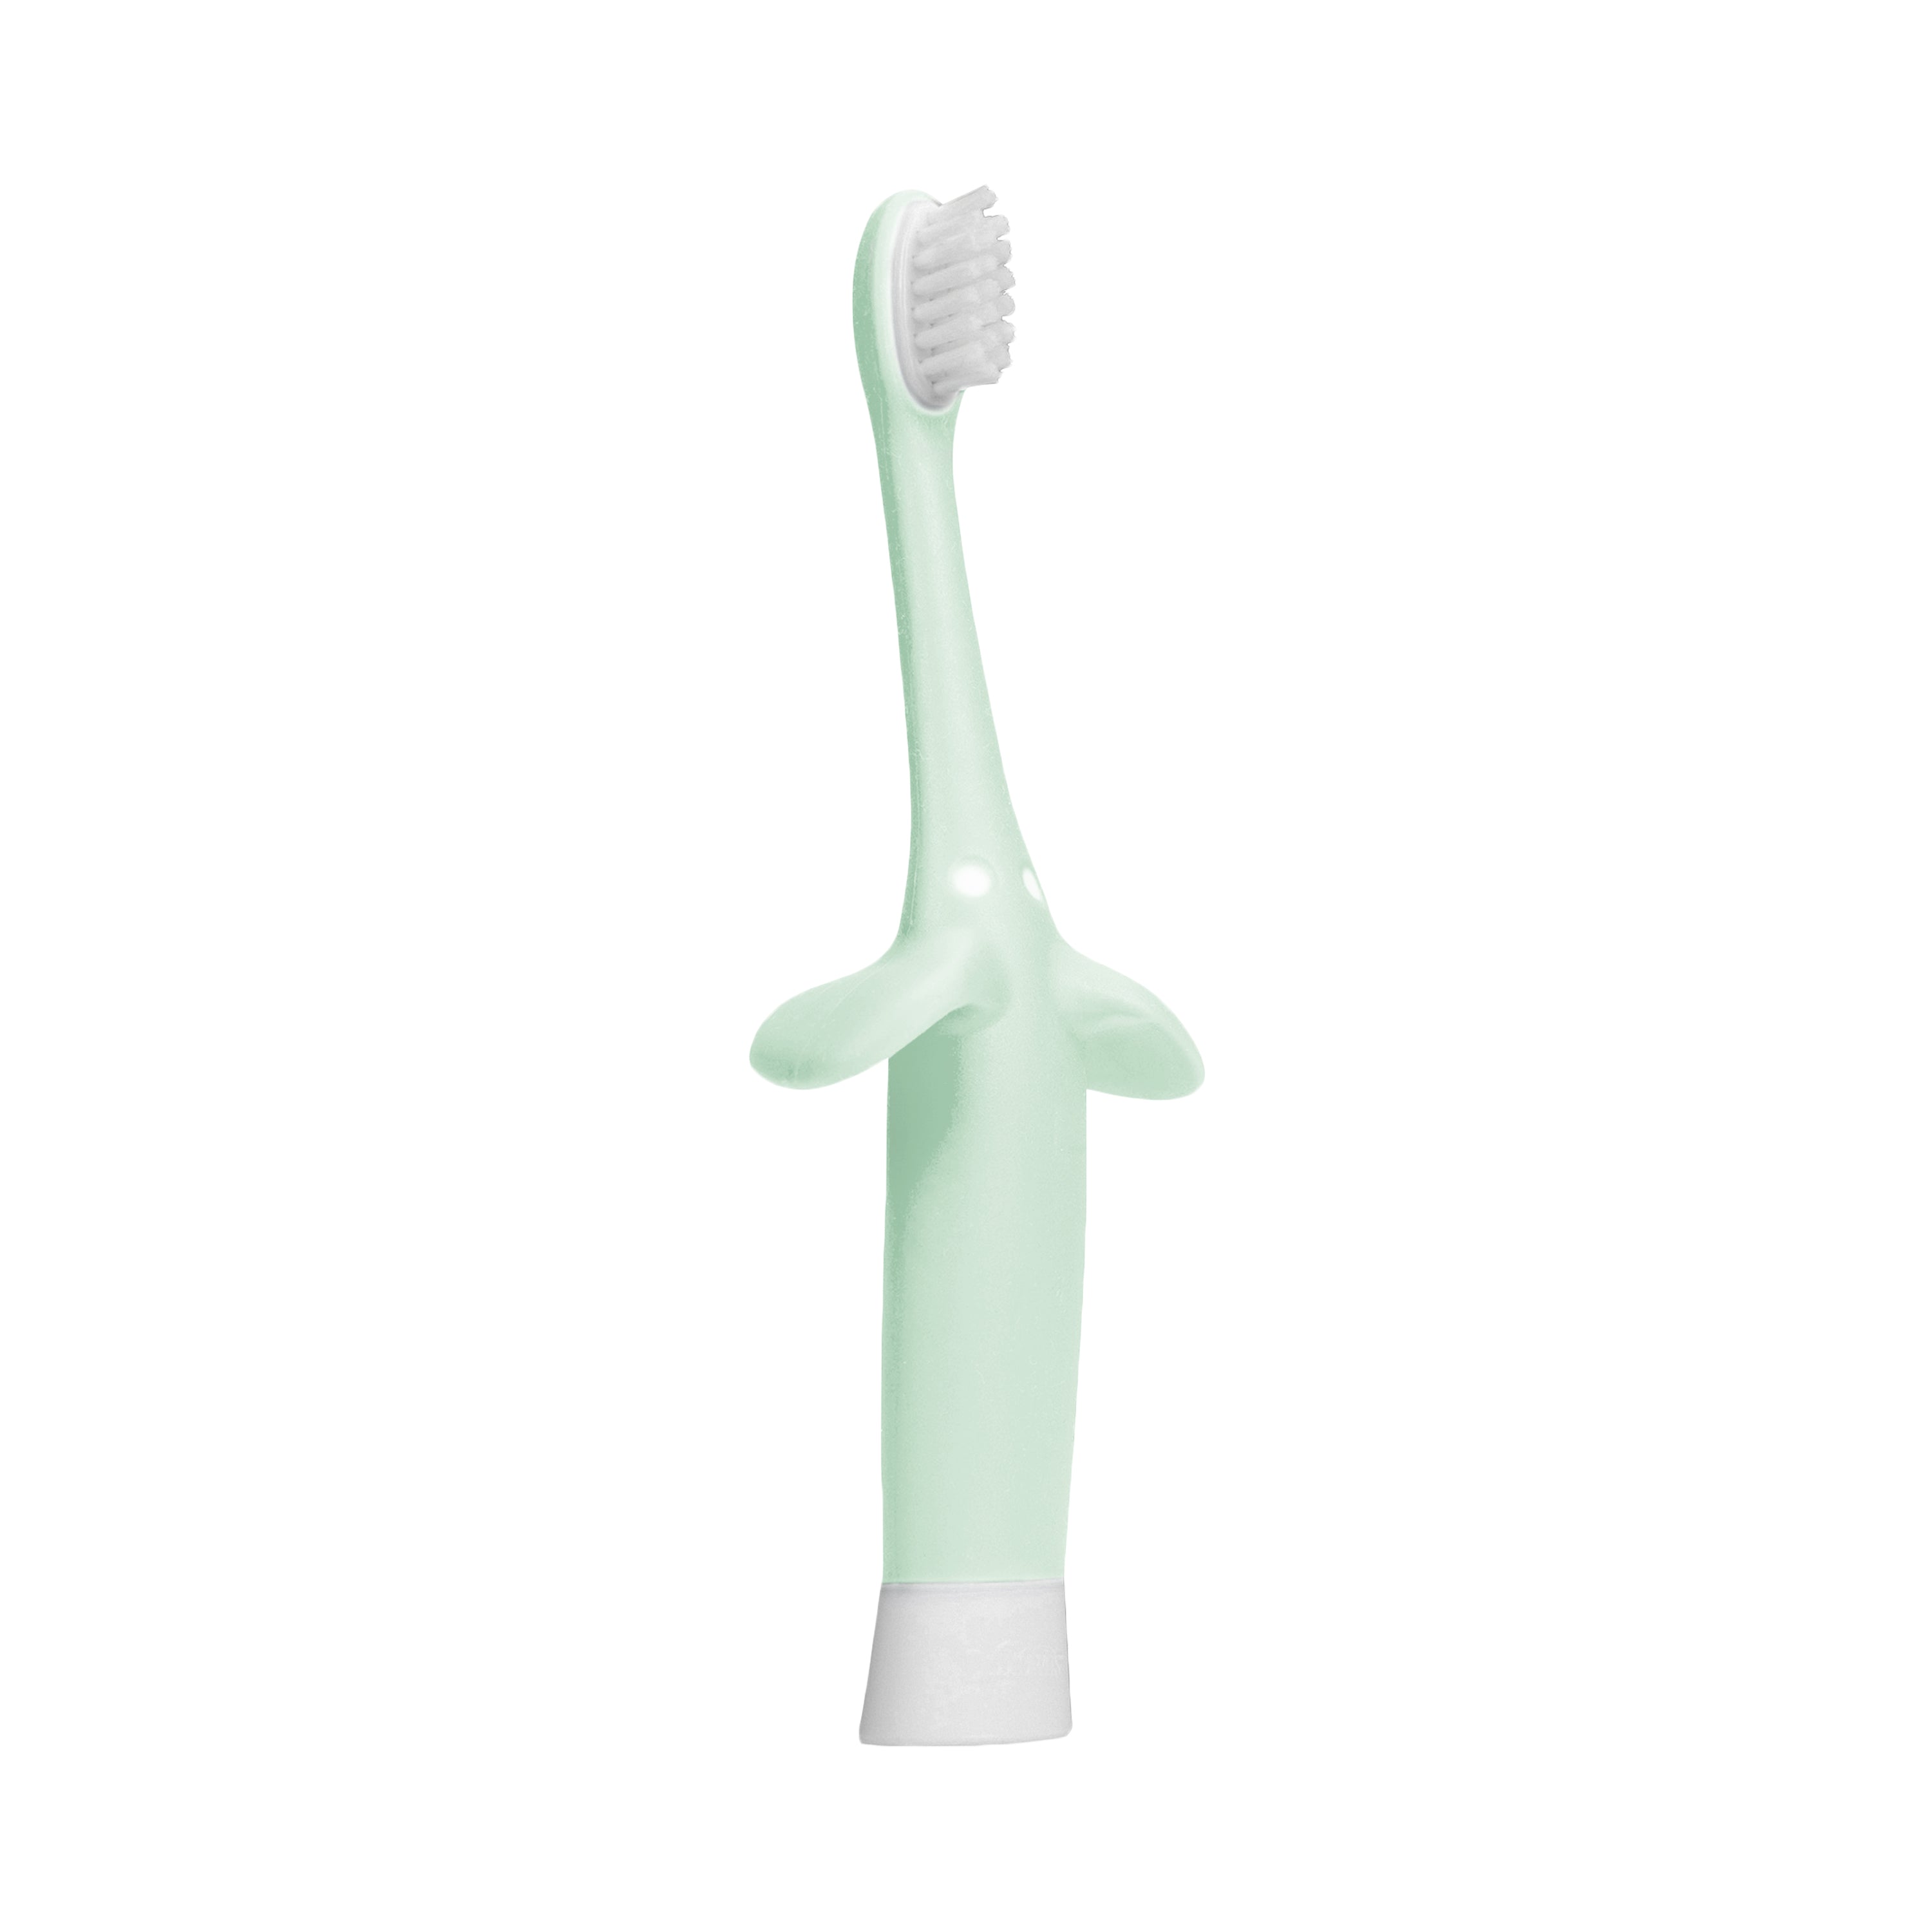 HG016_Product_Infant-to-Toddler_Toothbrush_Elephant_Mint_3.jpg